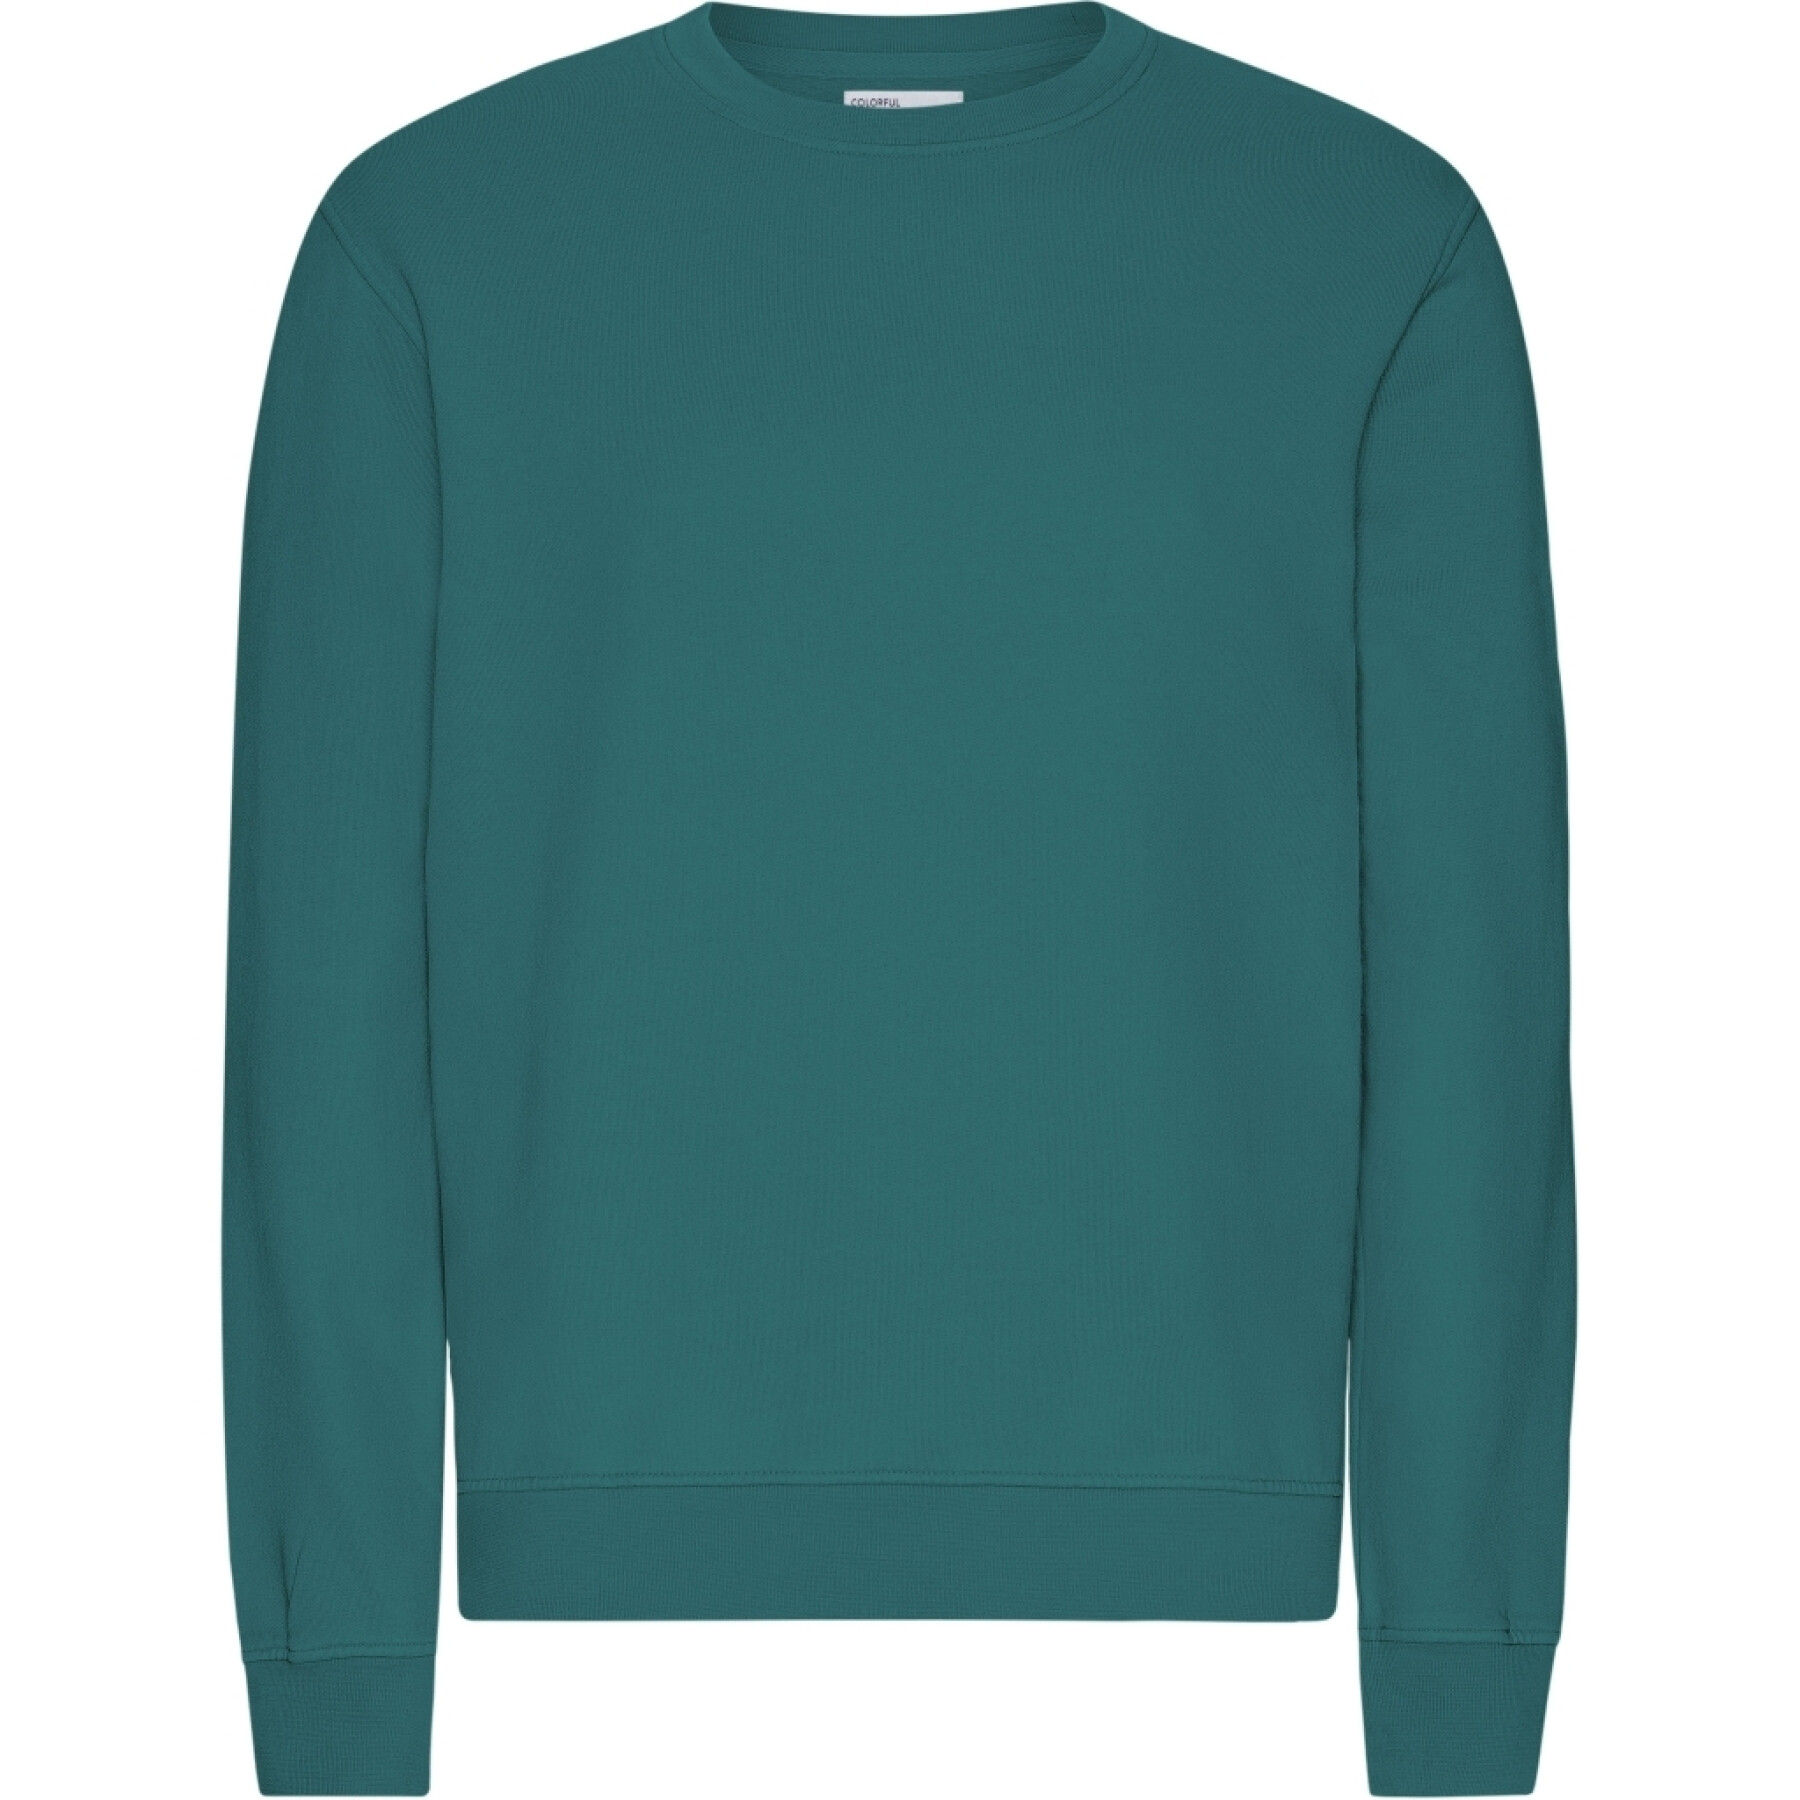 Pullover Colorful Standard Classic Organic Ocean Green